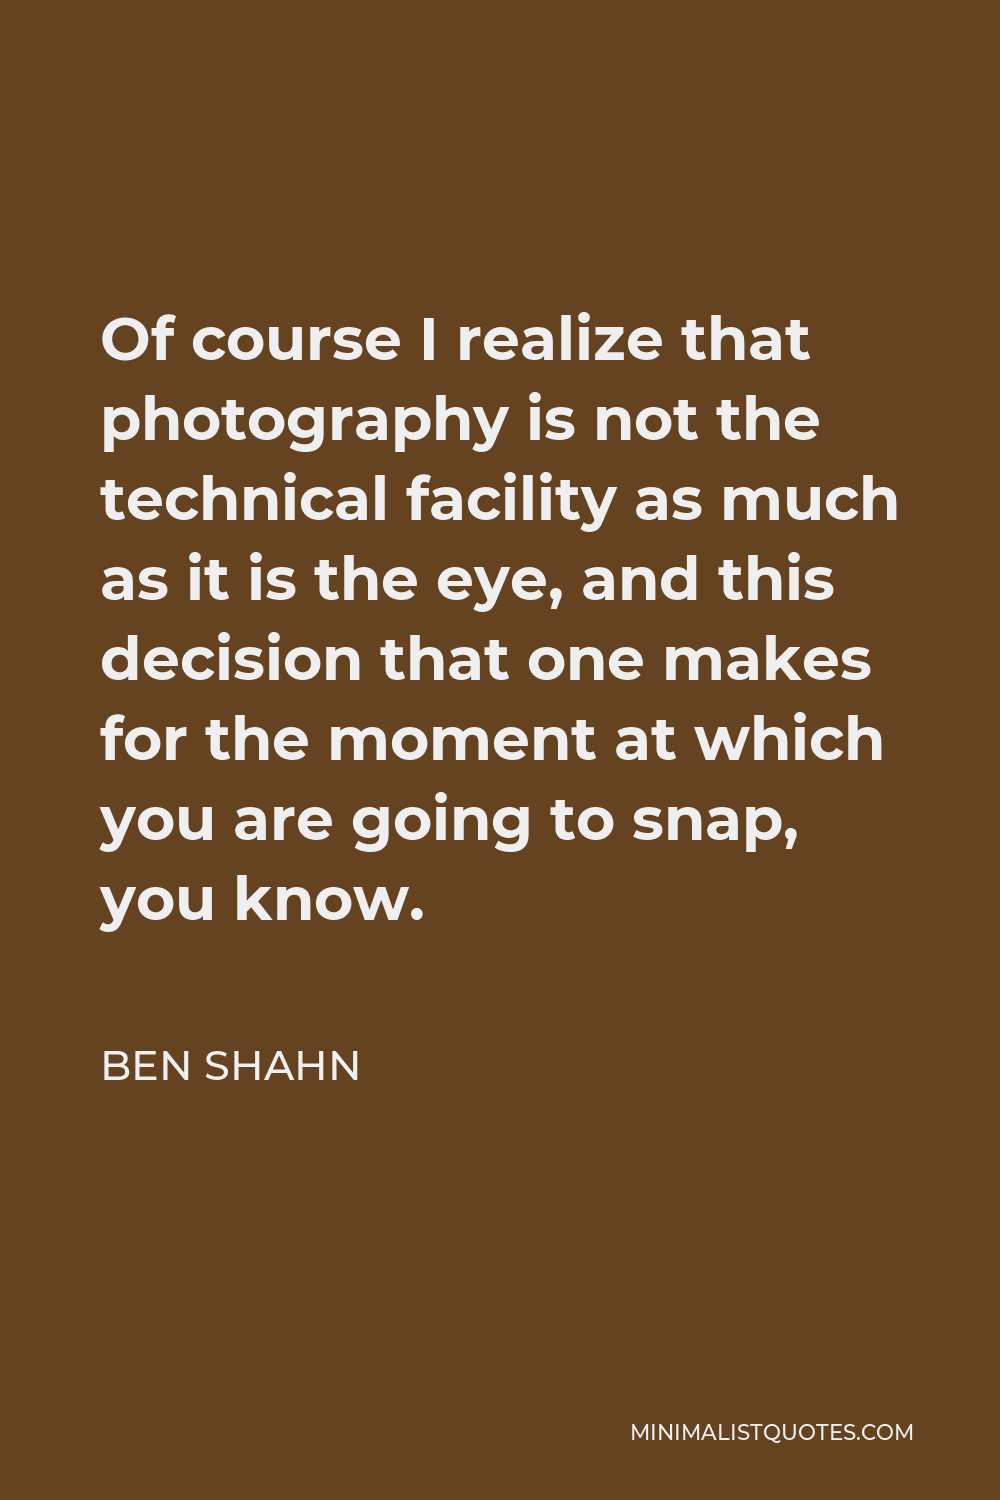 Ben Shahn Quote - Of course I realize that photography is not the technical facility as much as it is the eye, and this decision that one makes for the moment at which you are going to snap, you know.